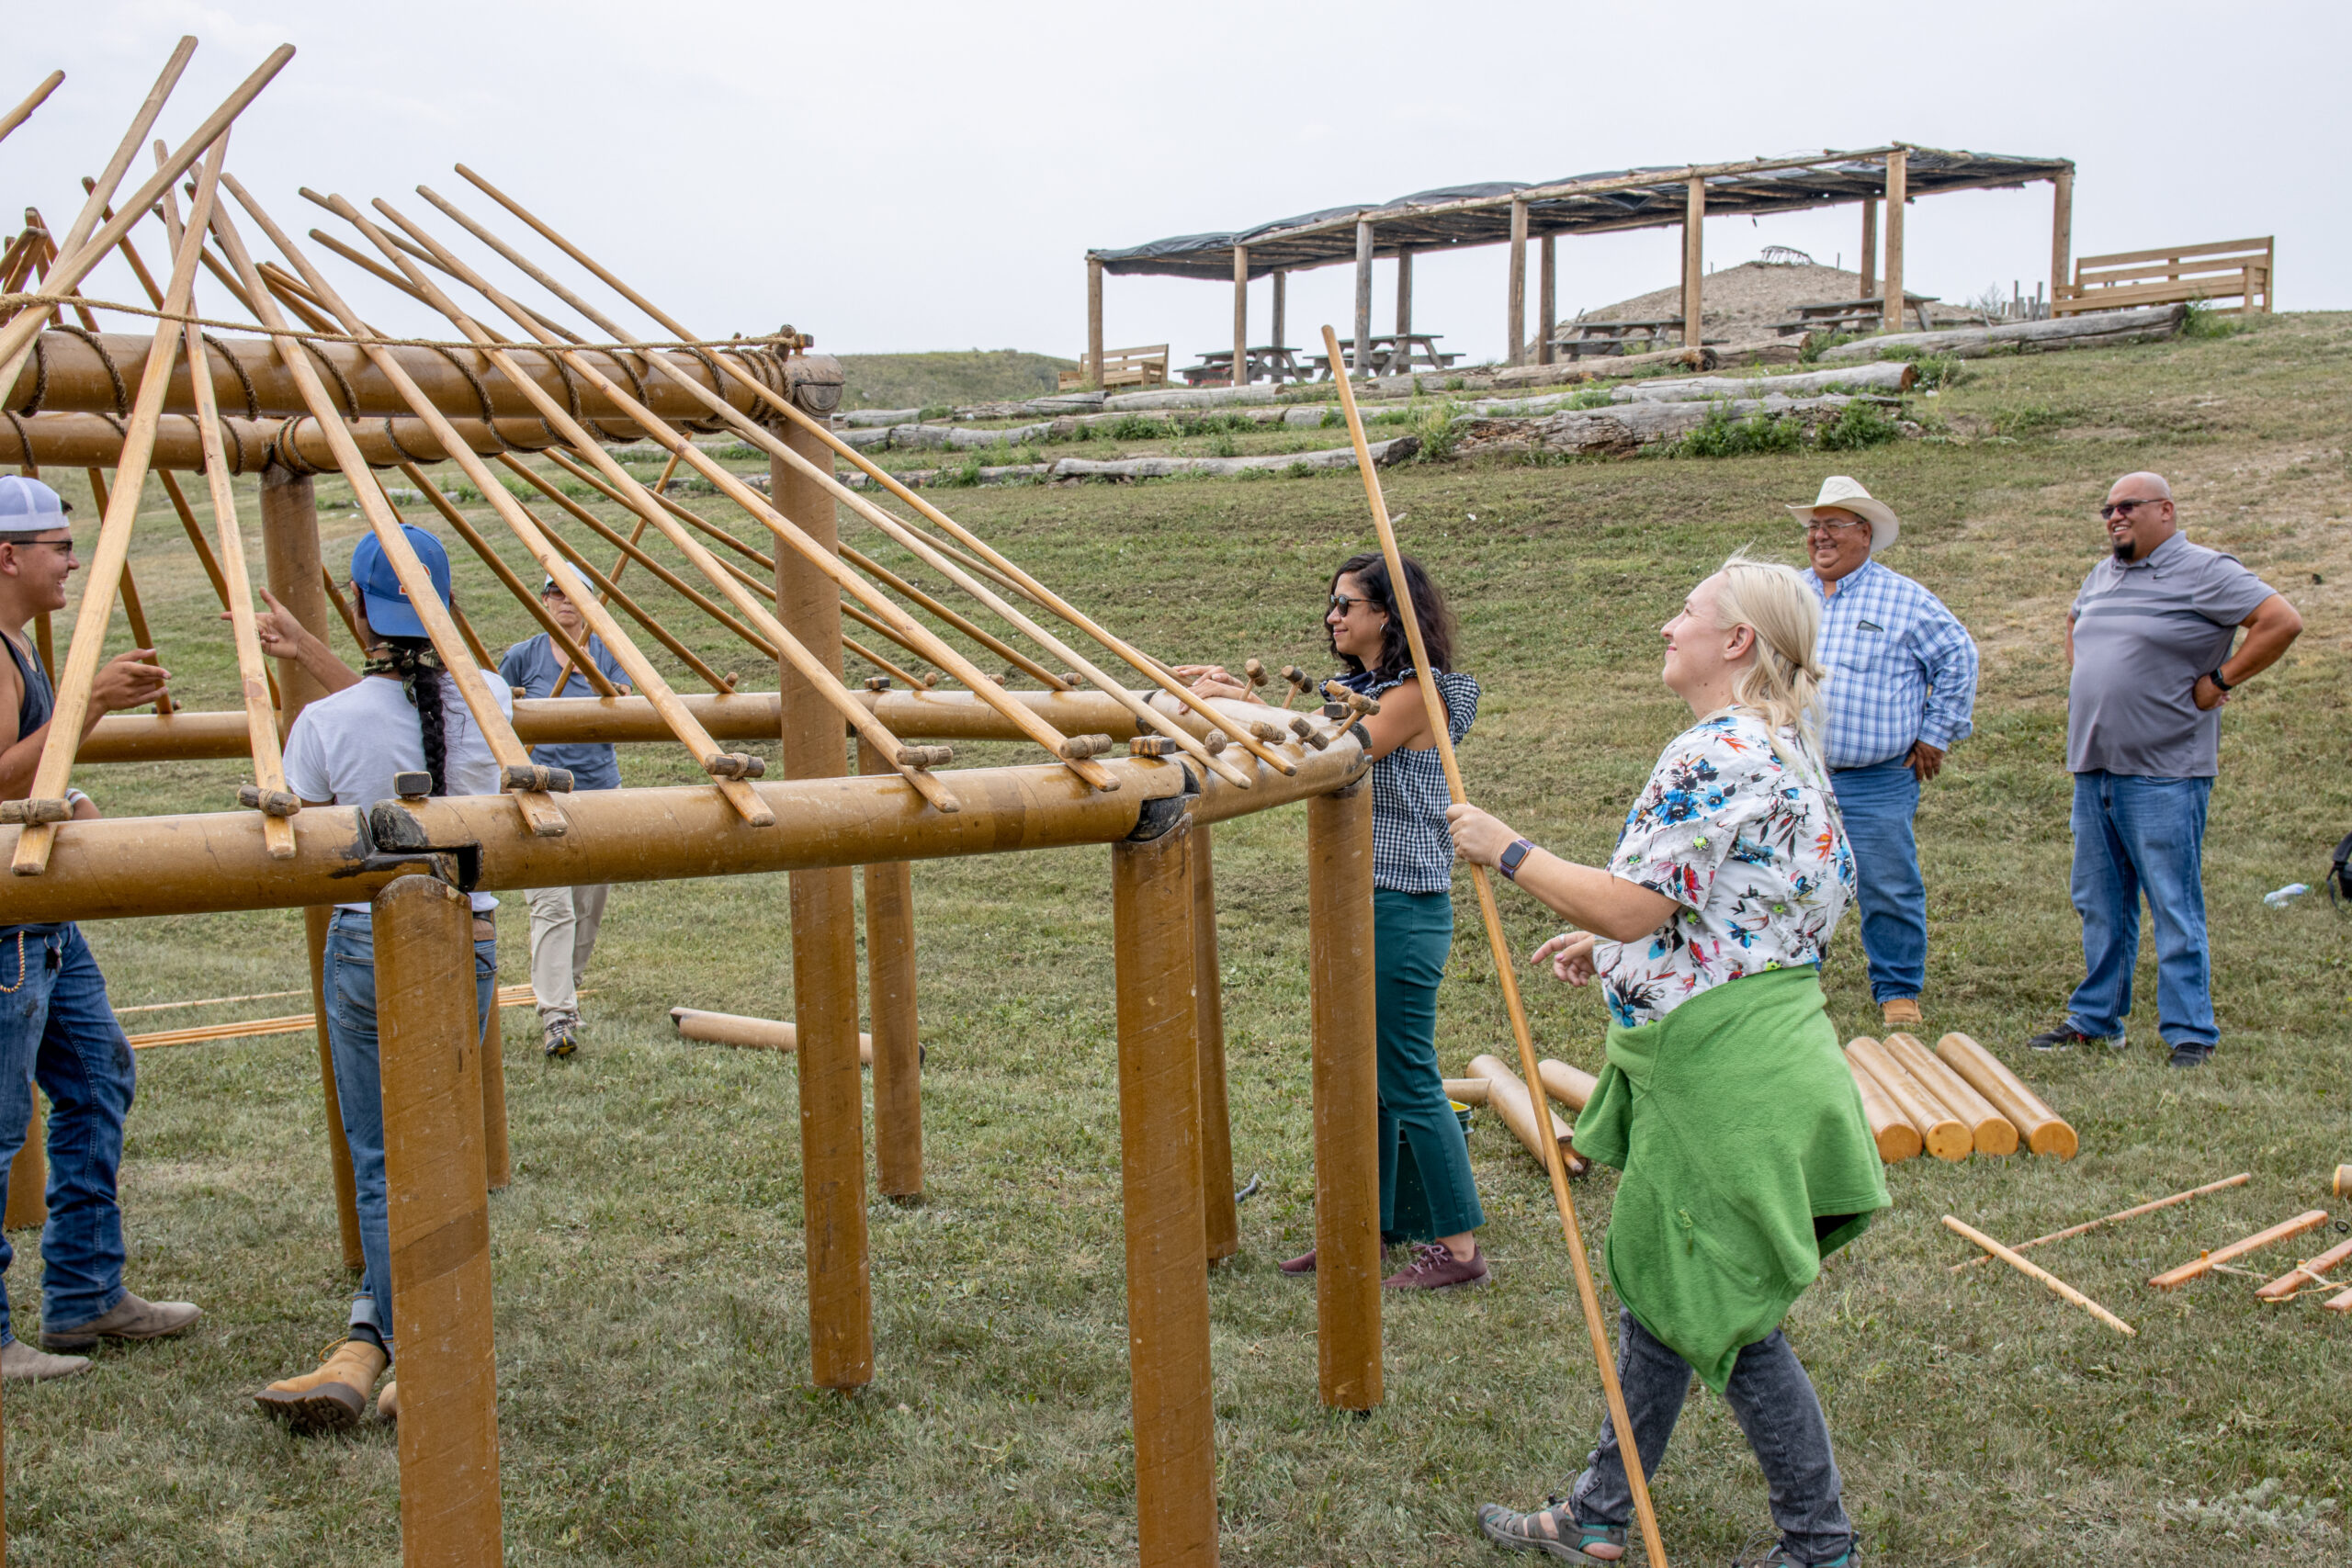 A group of people hold wooden building materials of varying sizes and shapes to collectively build a circular outdoor shelter.